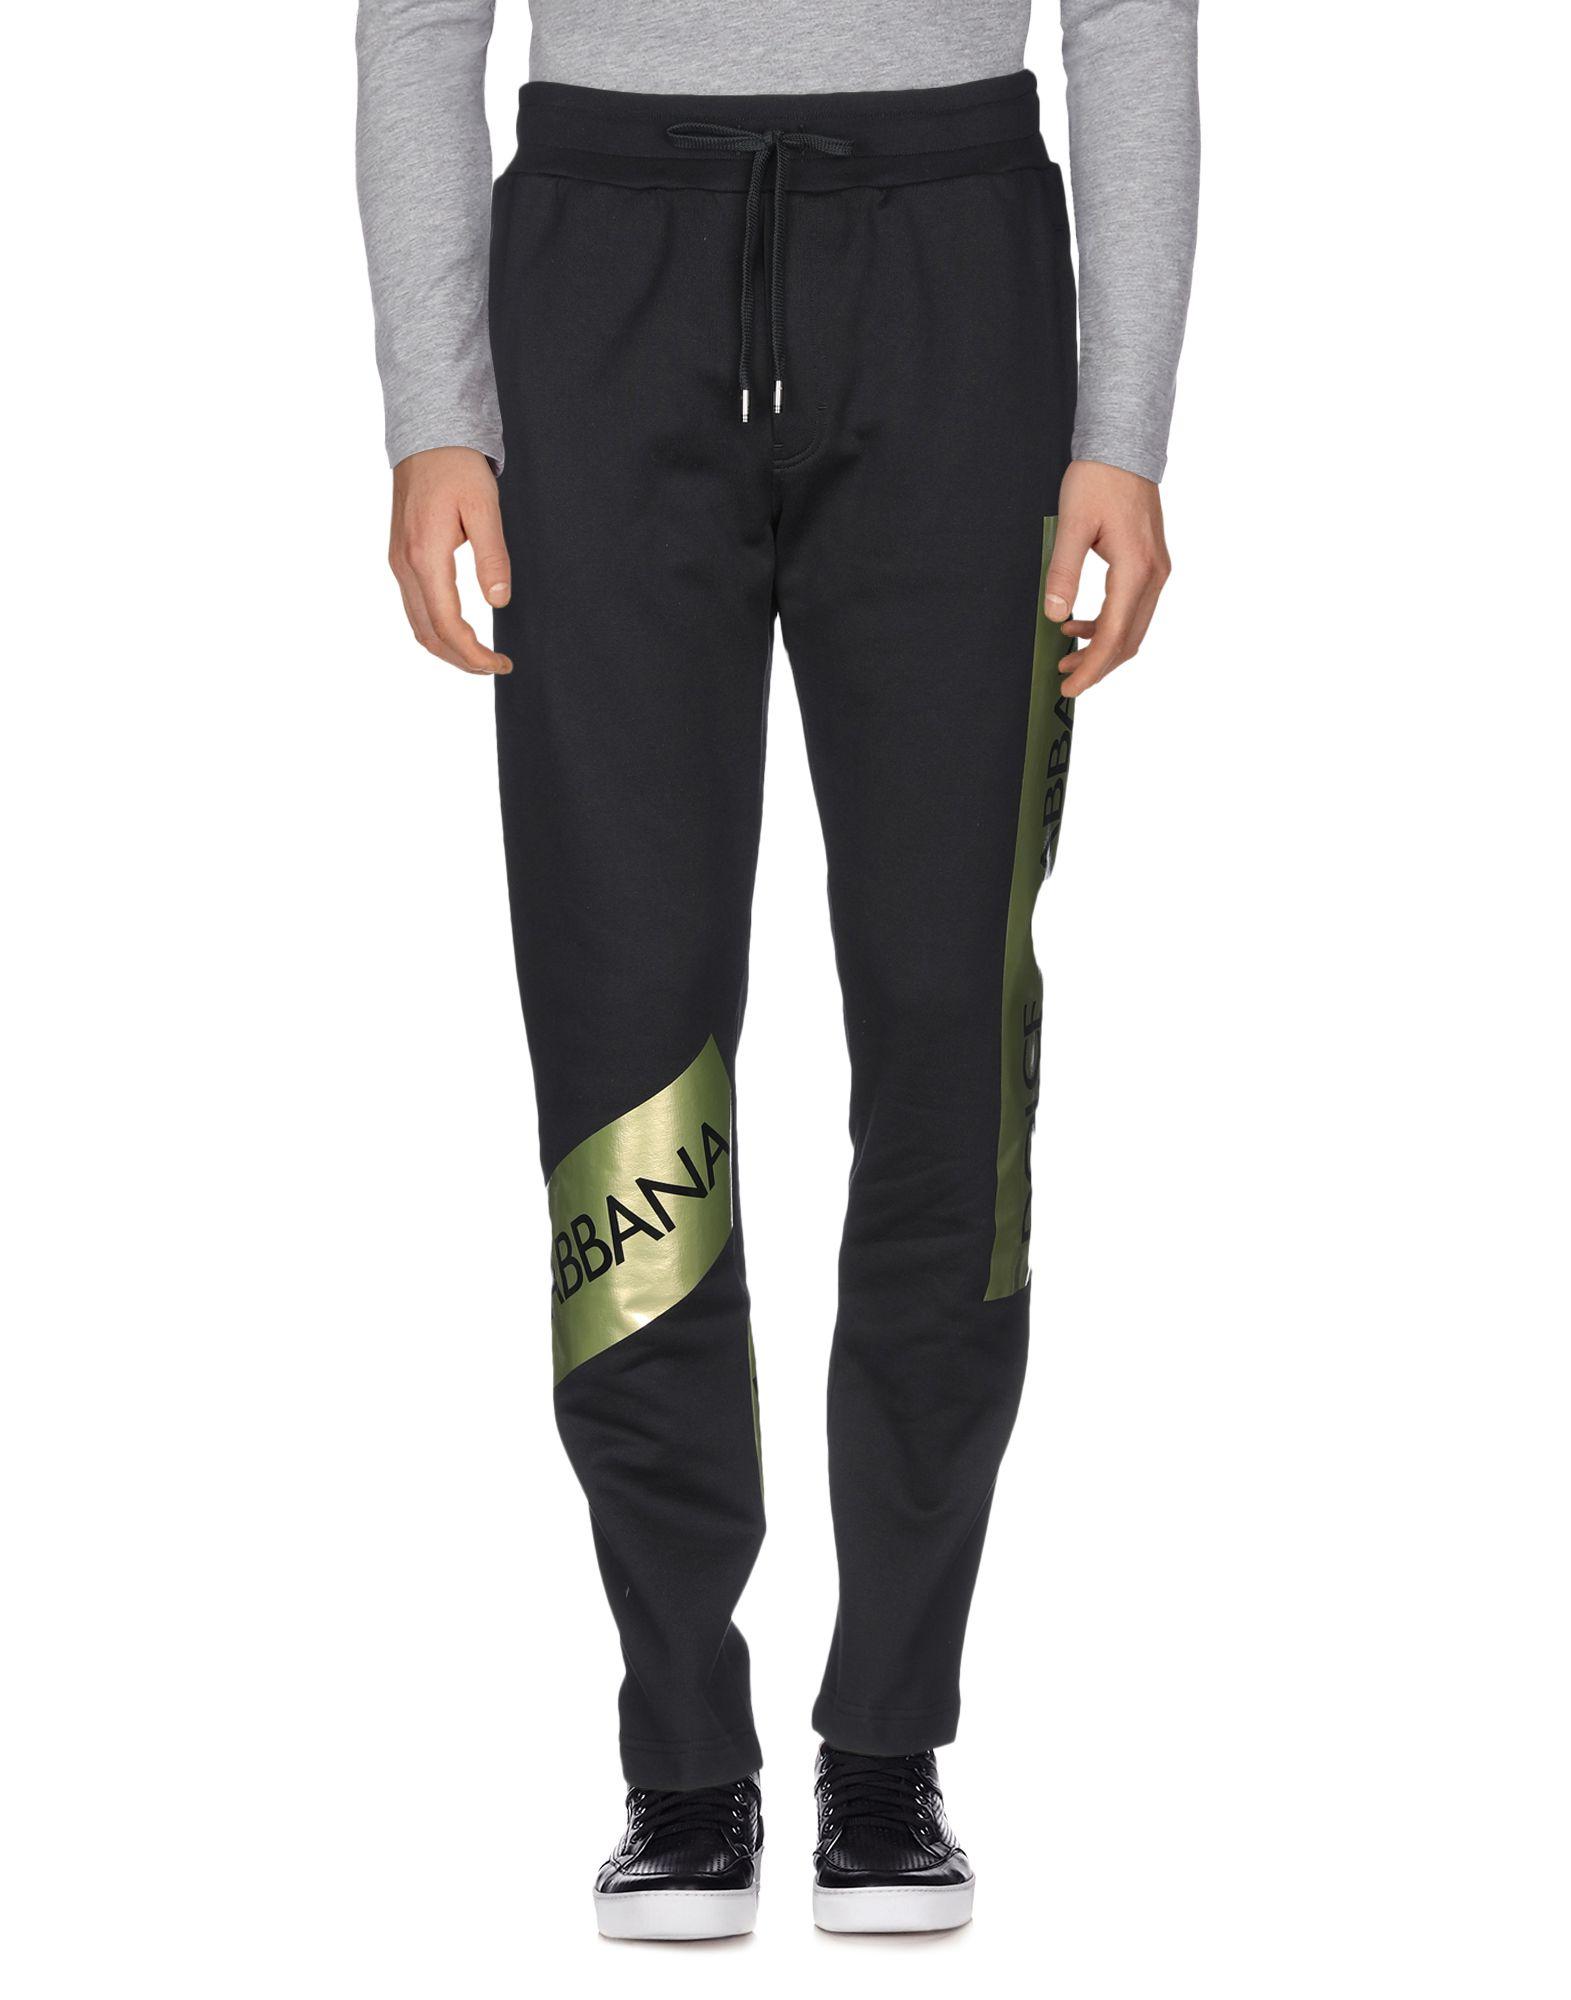 Dolce & Gabbana Casual Pants in Black for Men - Lyst